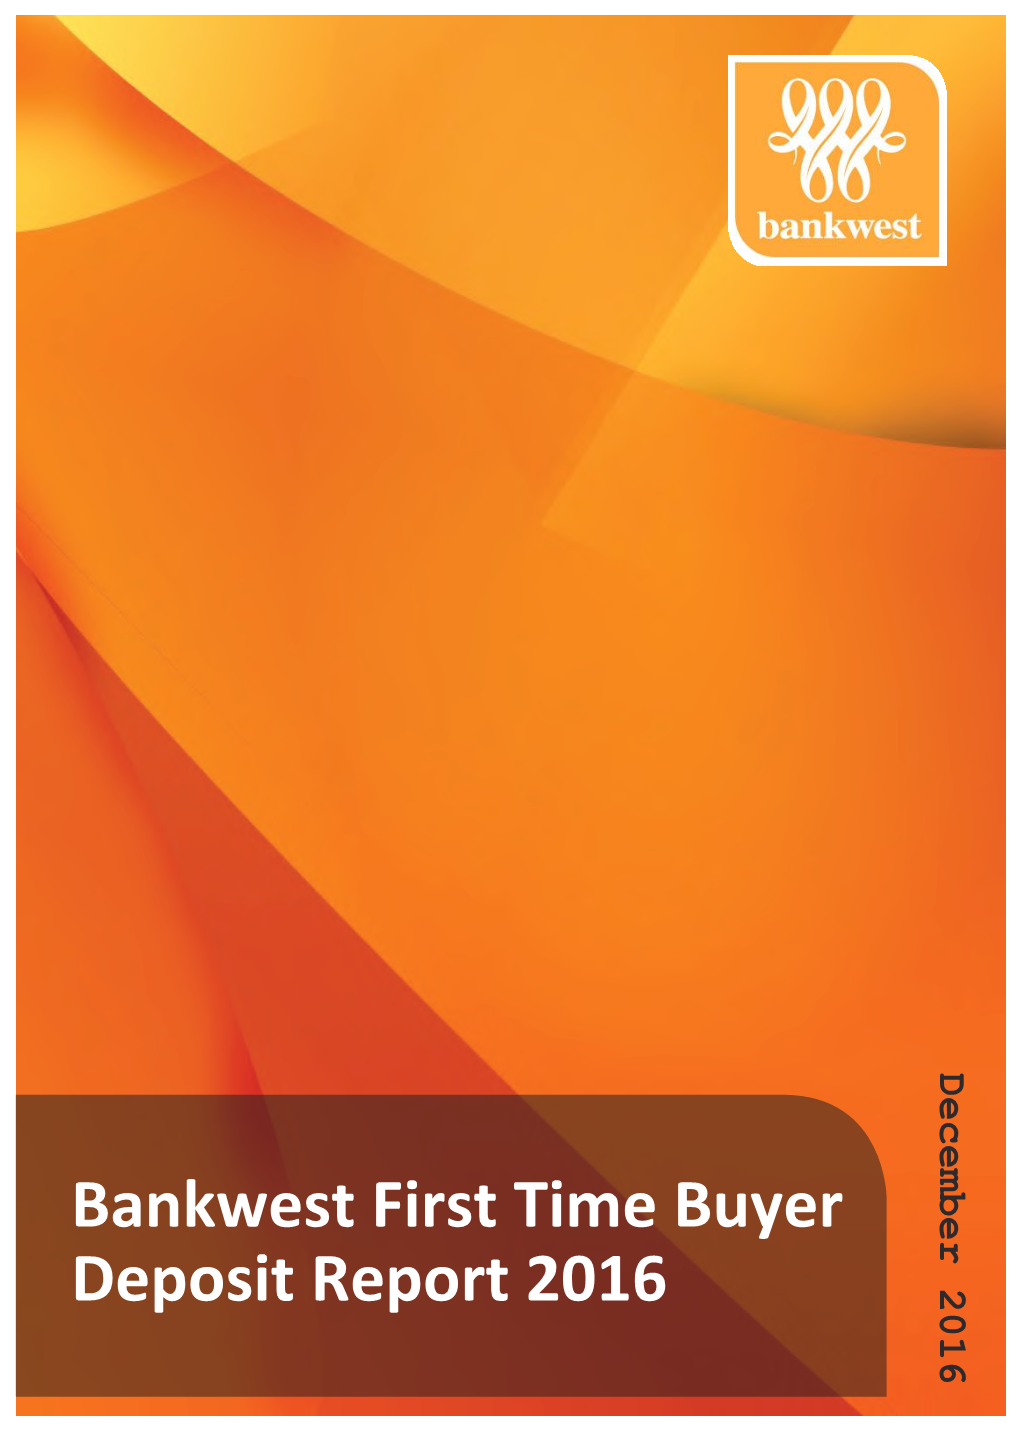 Bankwest First Time Buyer Deposit Report 2016 Introduction This Research Was Prepared by Coredata for Bankwest